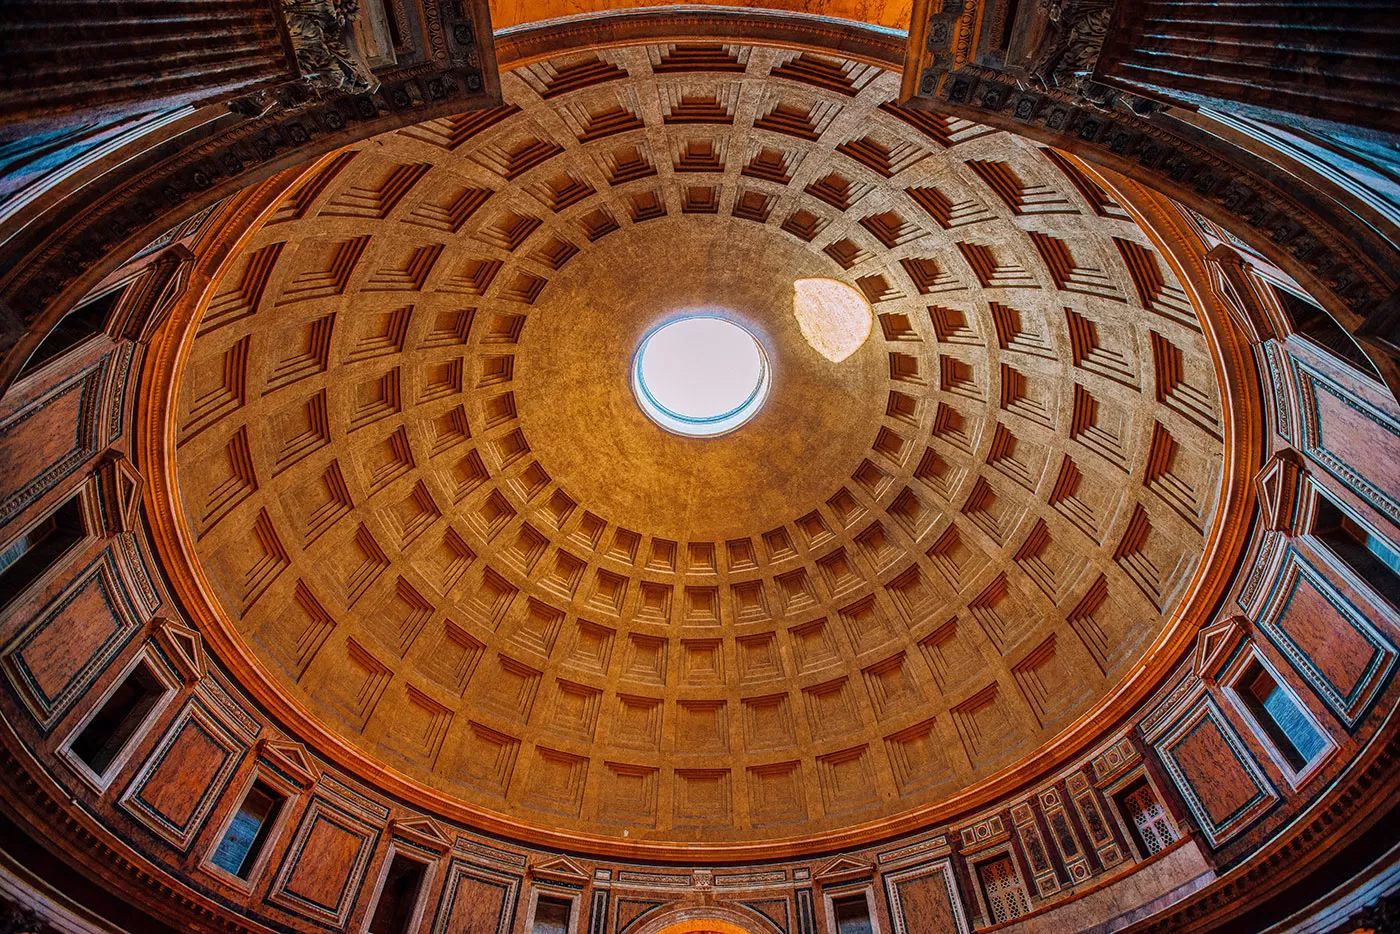 Rome 3 Day Itinerary - Things to do in Rome in 3 days - Oculus inside the Pantheon